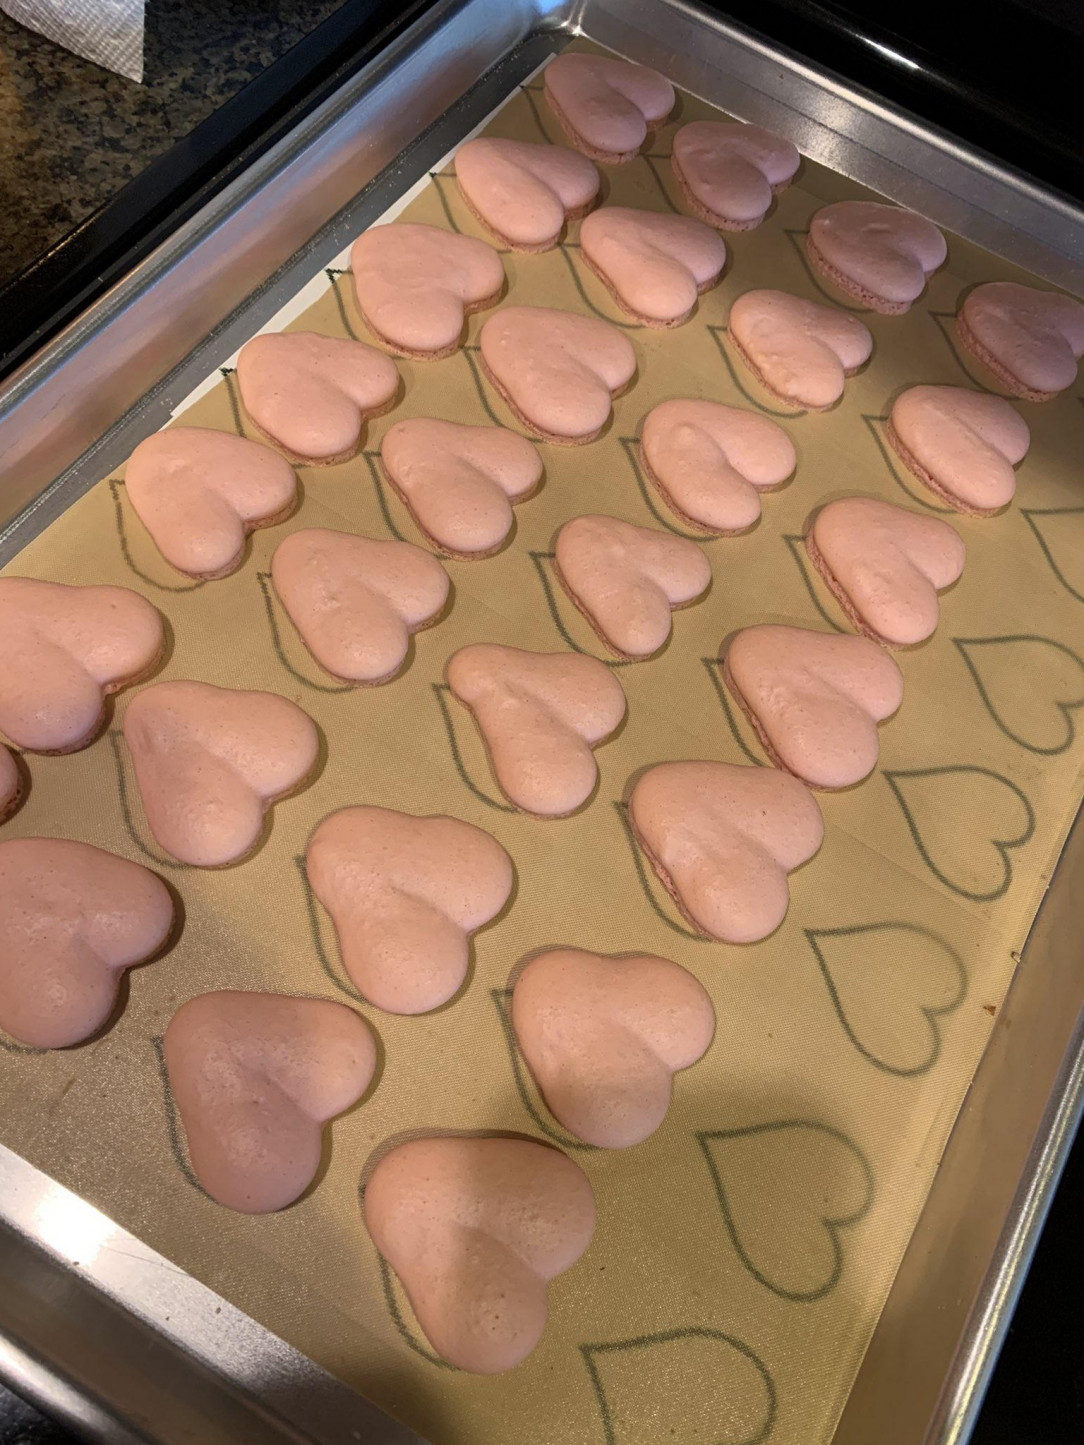 What could go wrong when you try to bake some heart shaped cookies